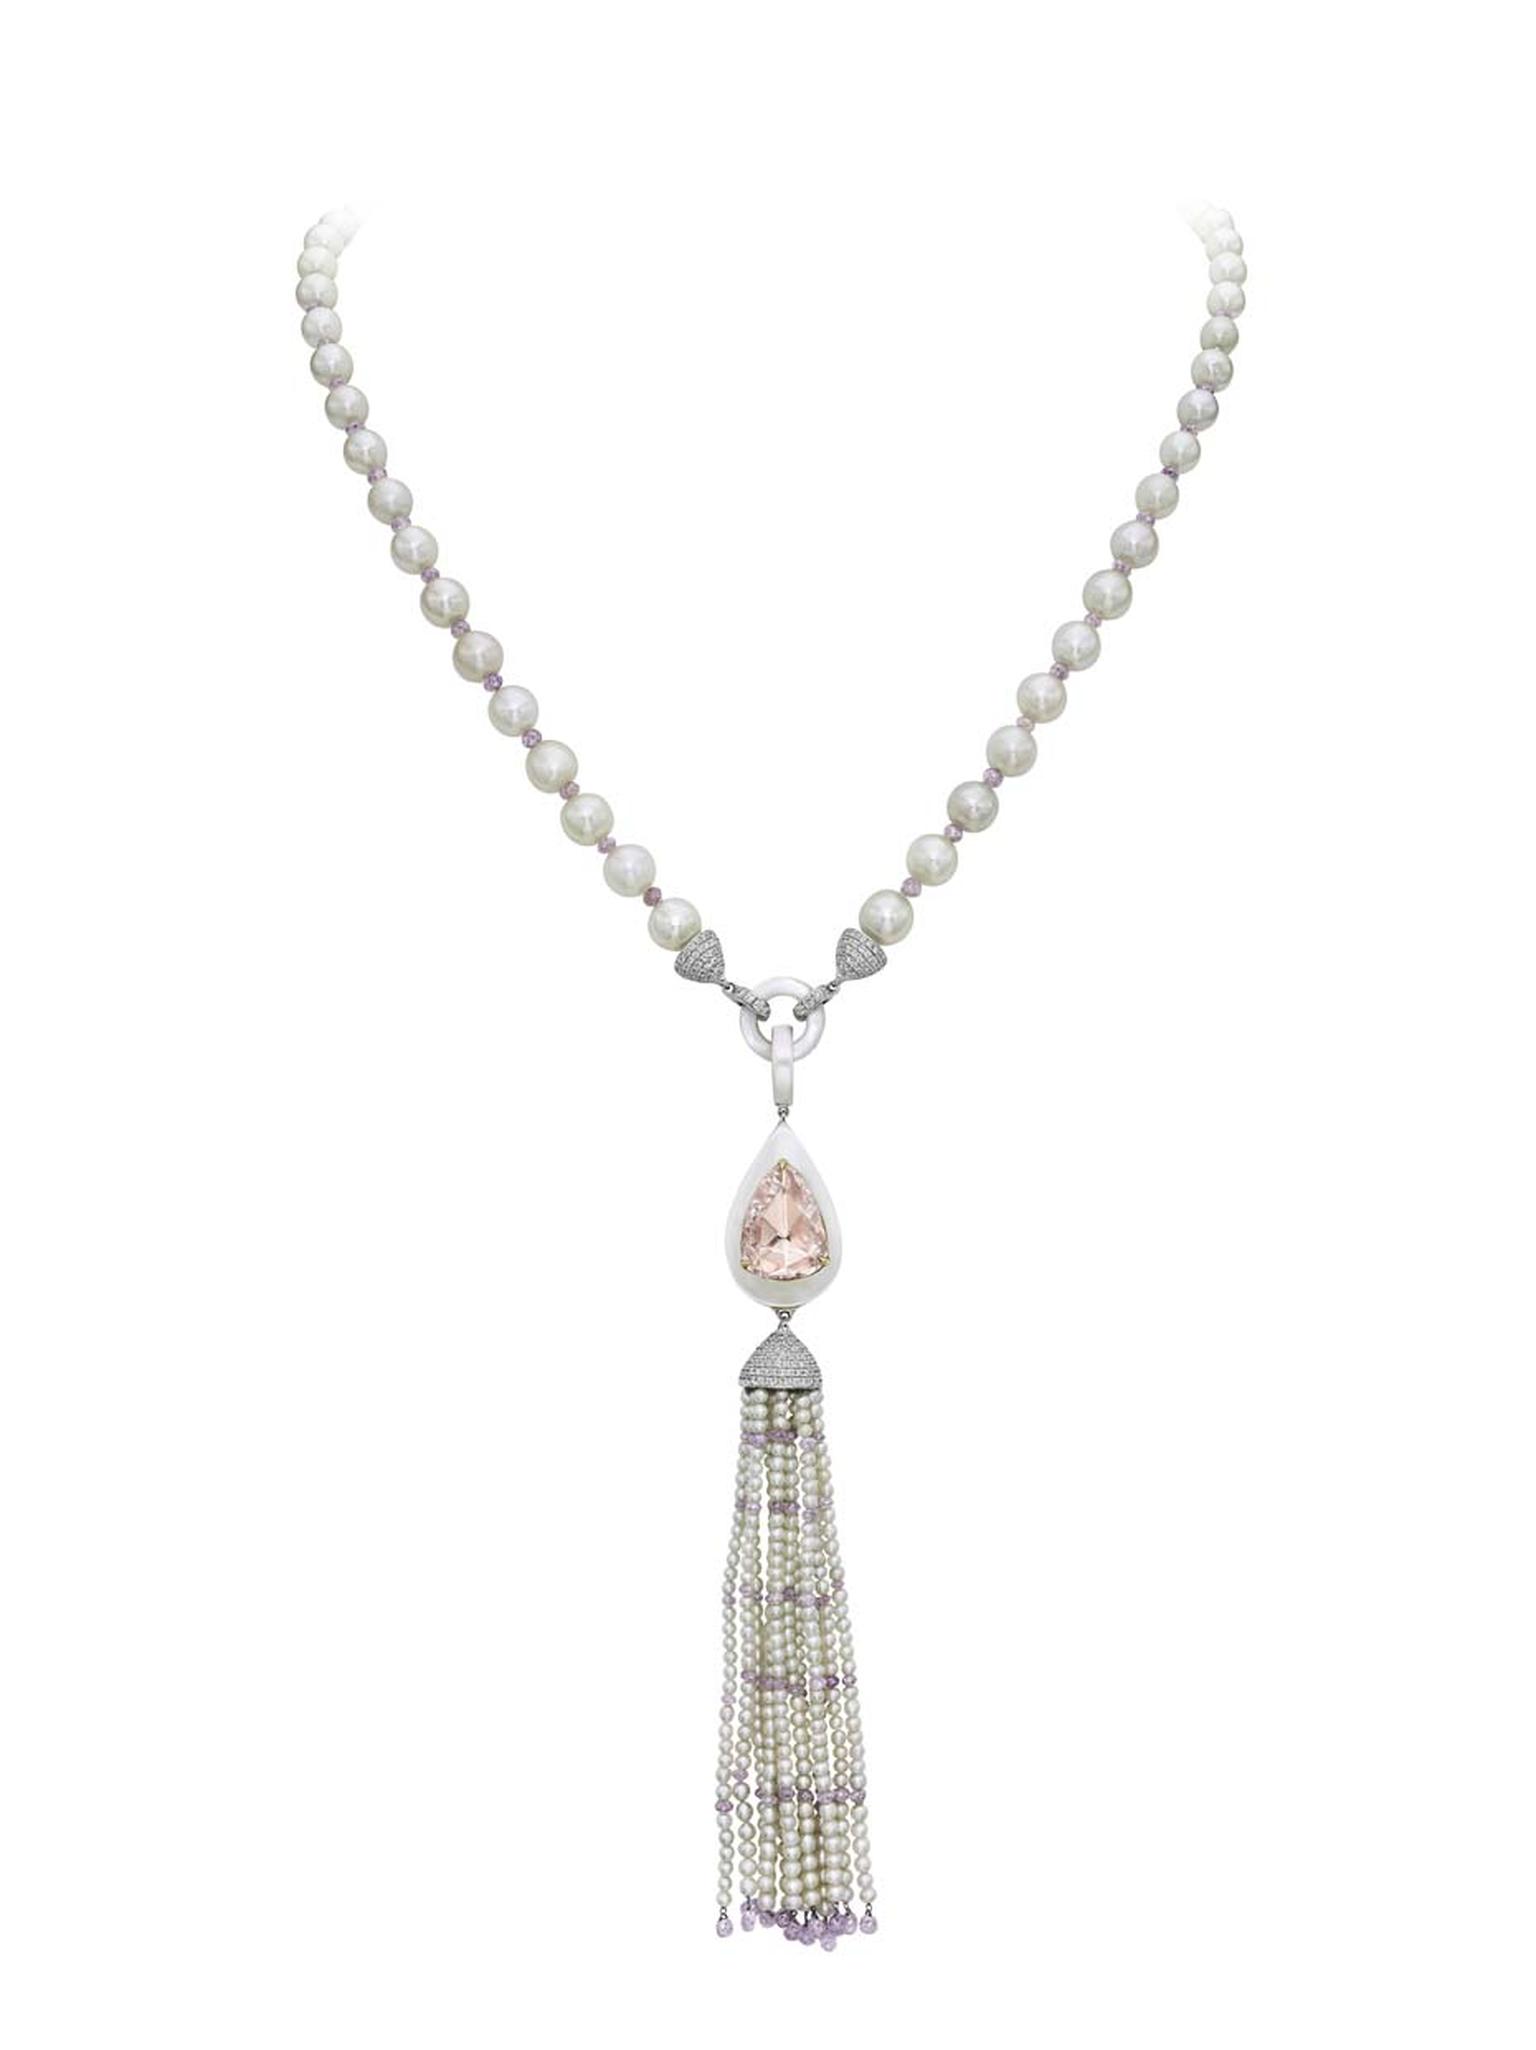 Boghossian tassel necklace featuring a 5.00ct pink diamond inlaid into mother-of-pearl, a necklace of natural saltwater pearls and briolette-cut pink diamonds with seed pearls on the tassels.